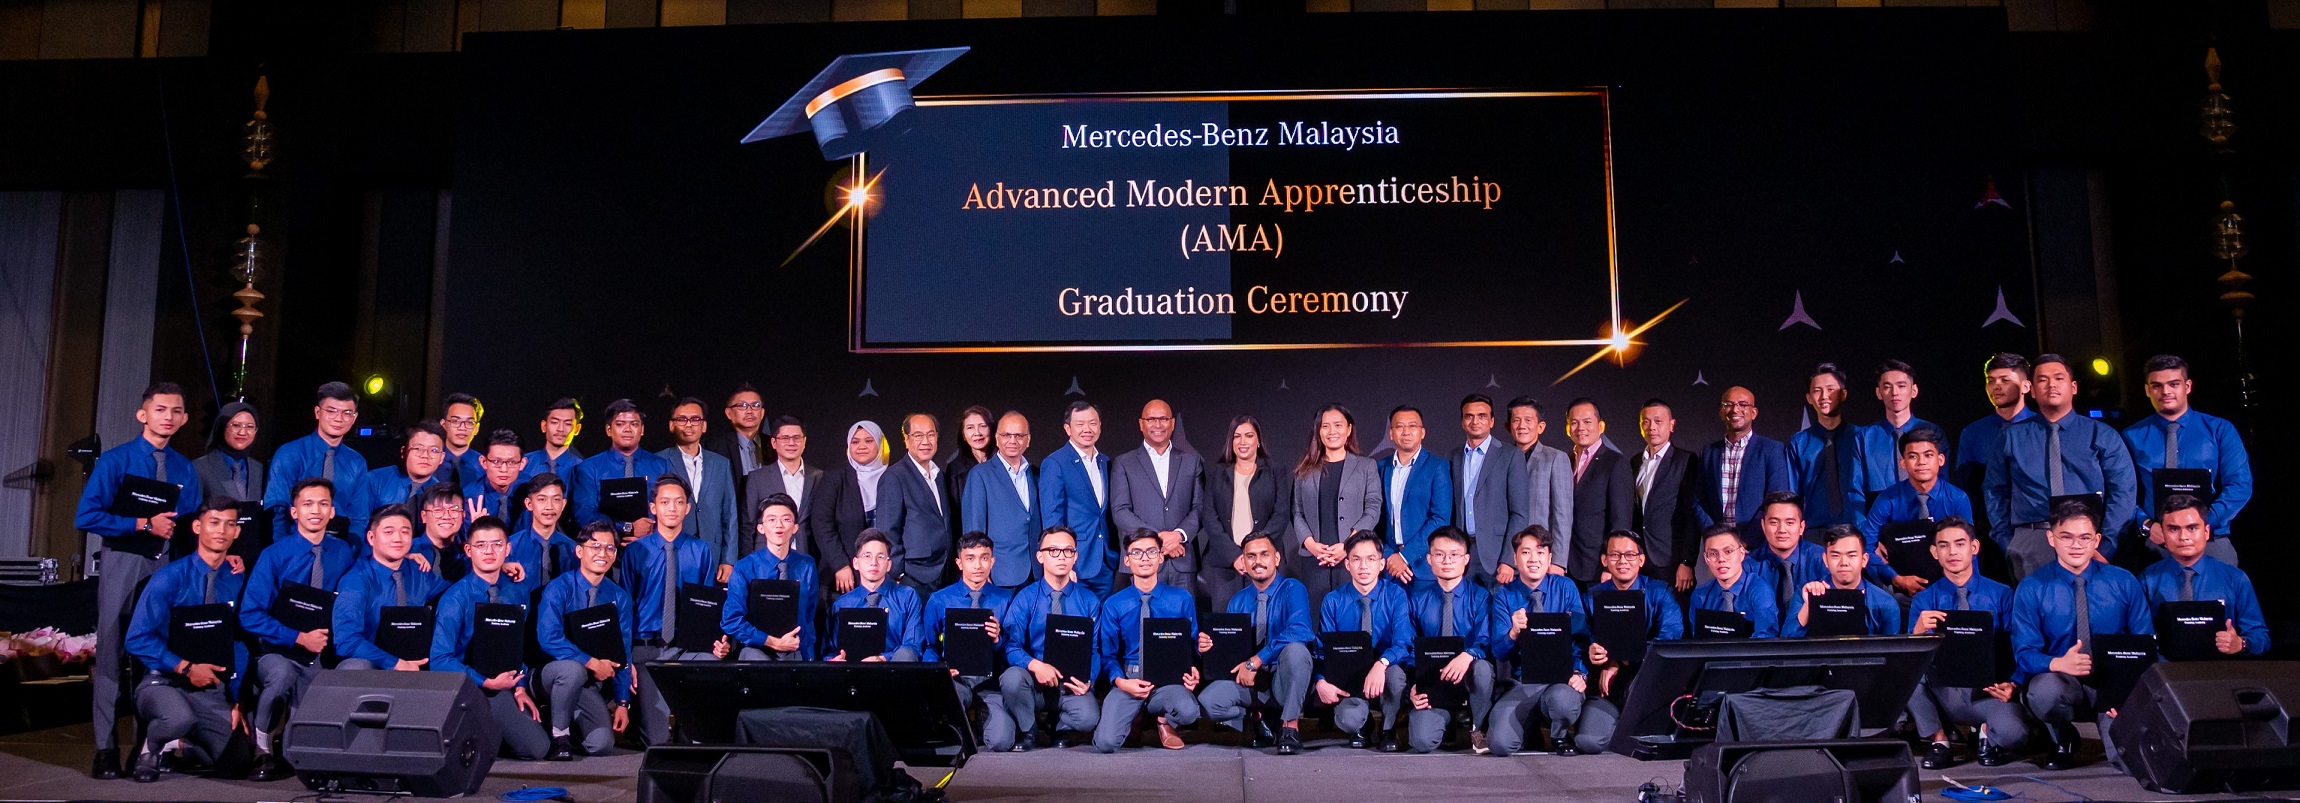 aftersales, apprenticeship, mercedes benz, mercedes-benz cars malaysia, mercedes-benz malaysia, montfort boys town, mercedes-benz apprenticeship programme adds more talent to its dealer network